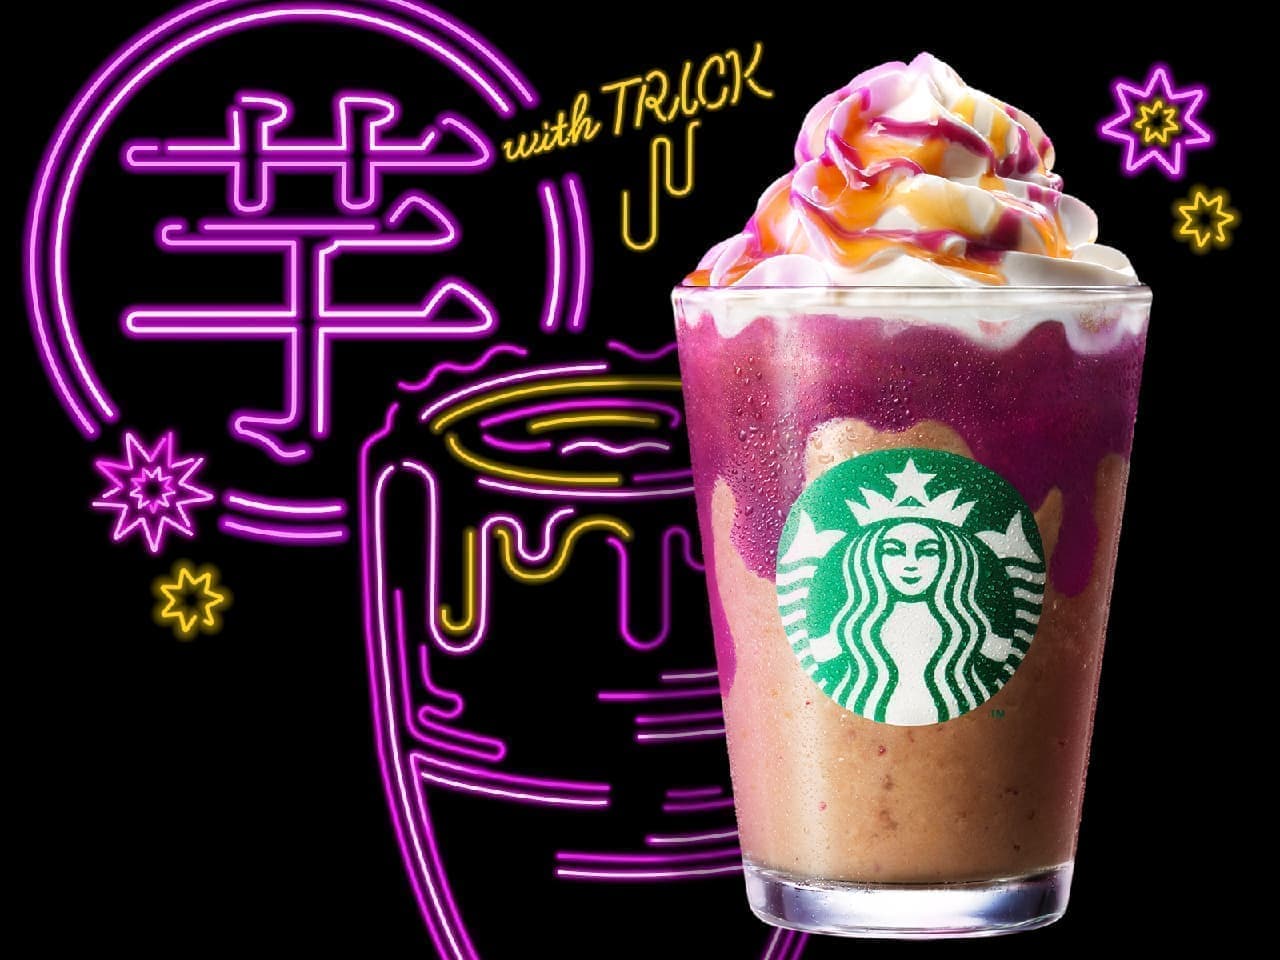 Starbucks Coffee "Treat with Trick Frappuccino"